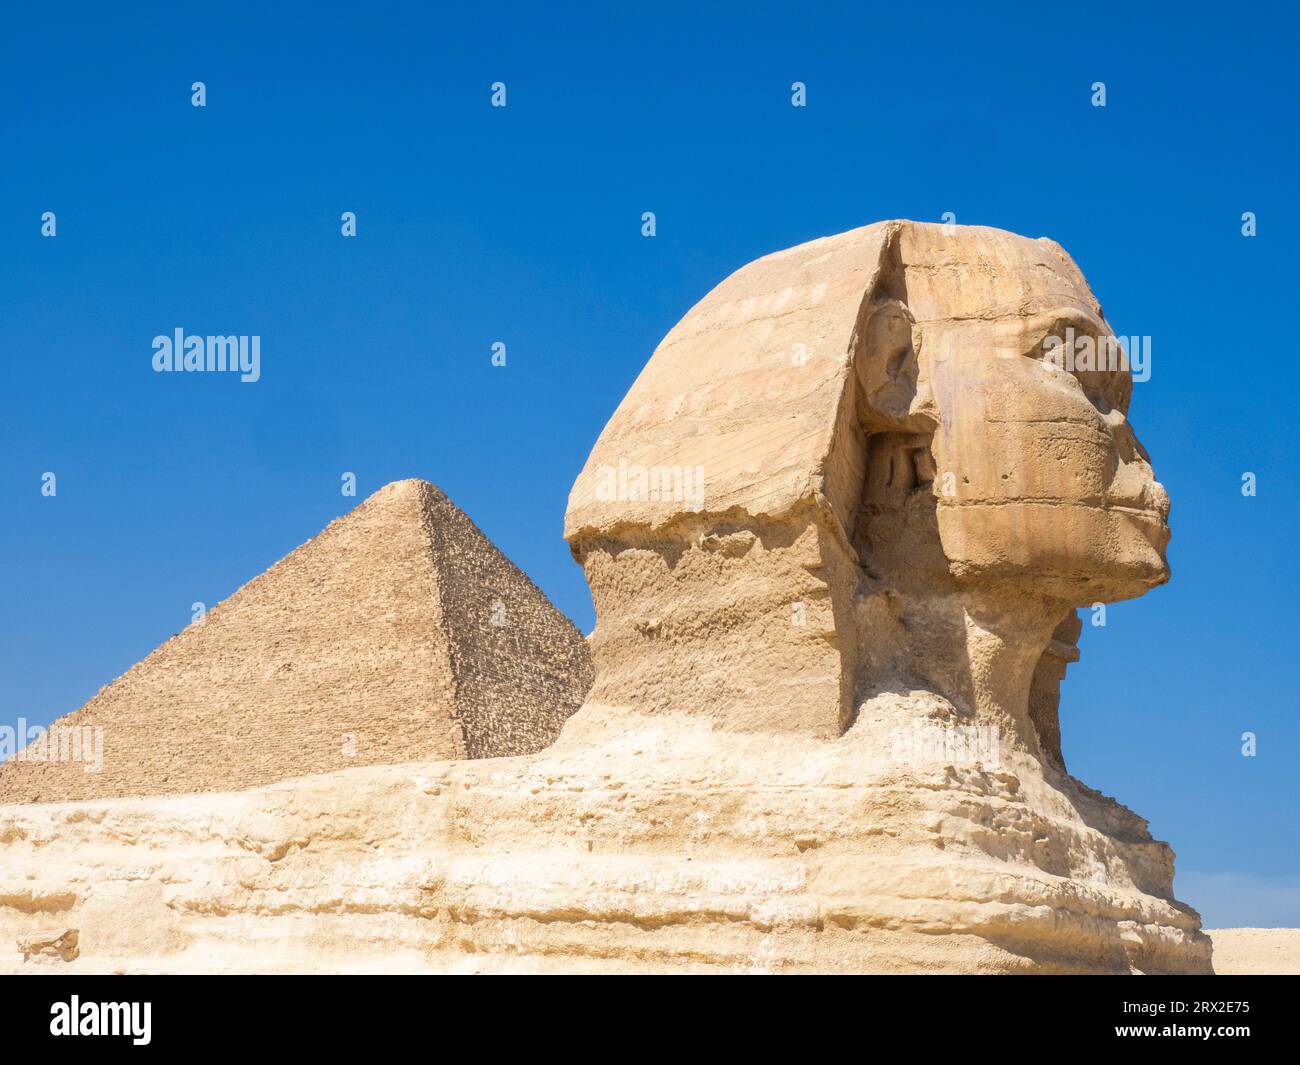 The Great Sphinx of Giza near the Great Pyramid of Giza, the oldest of the Seven Wonders of the World, Giza, near Cairo, Egypt Africa Stock Photo